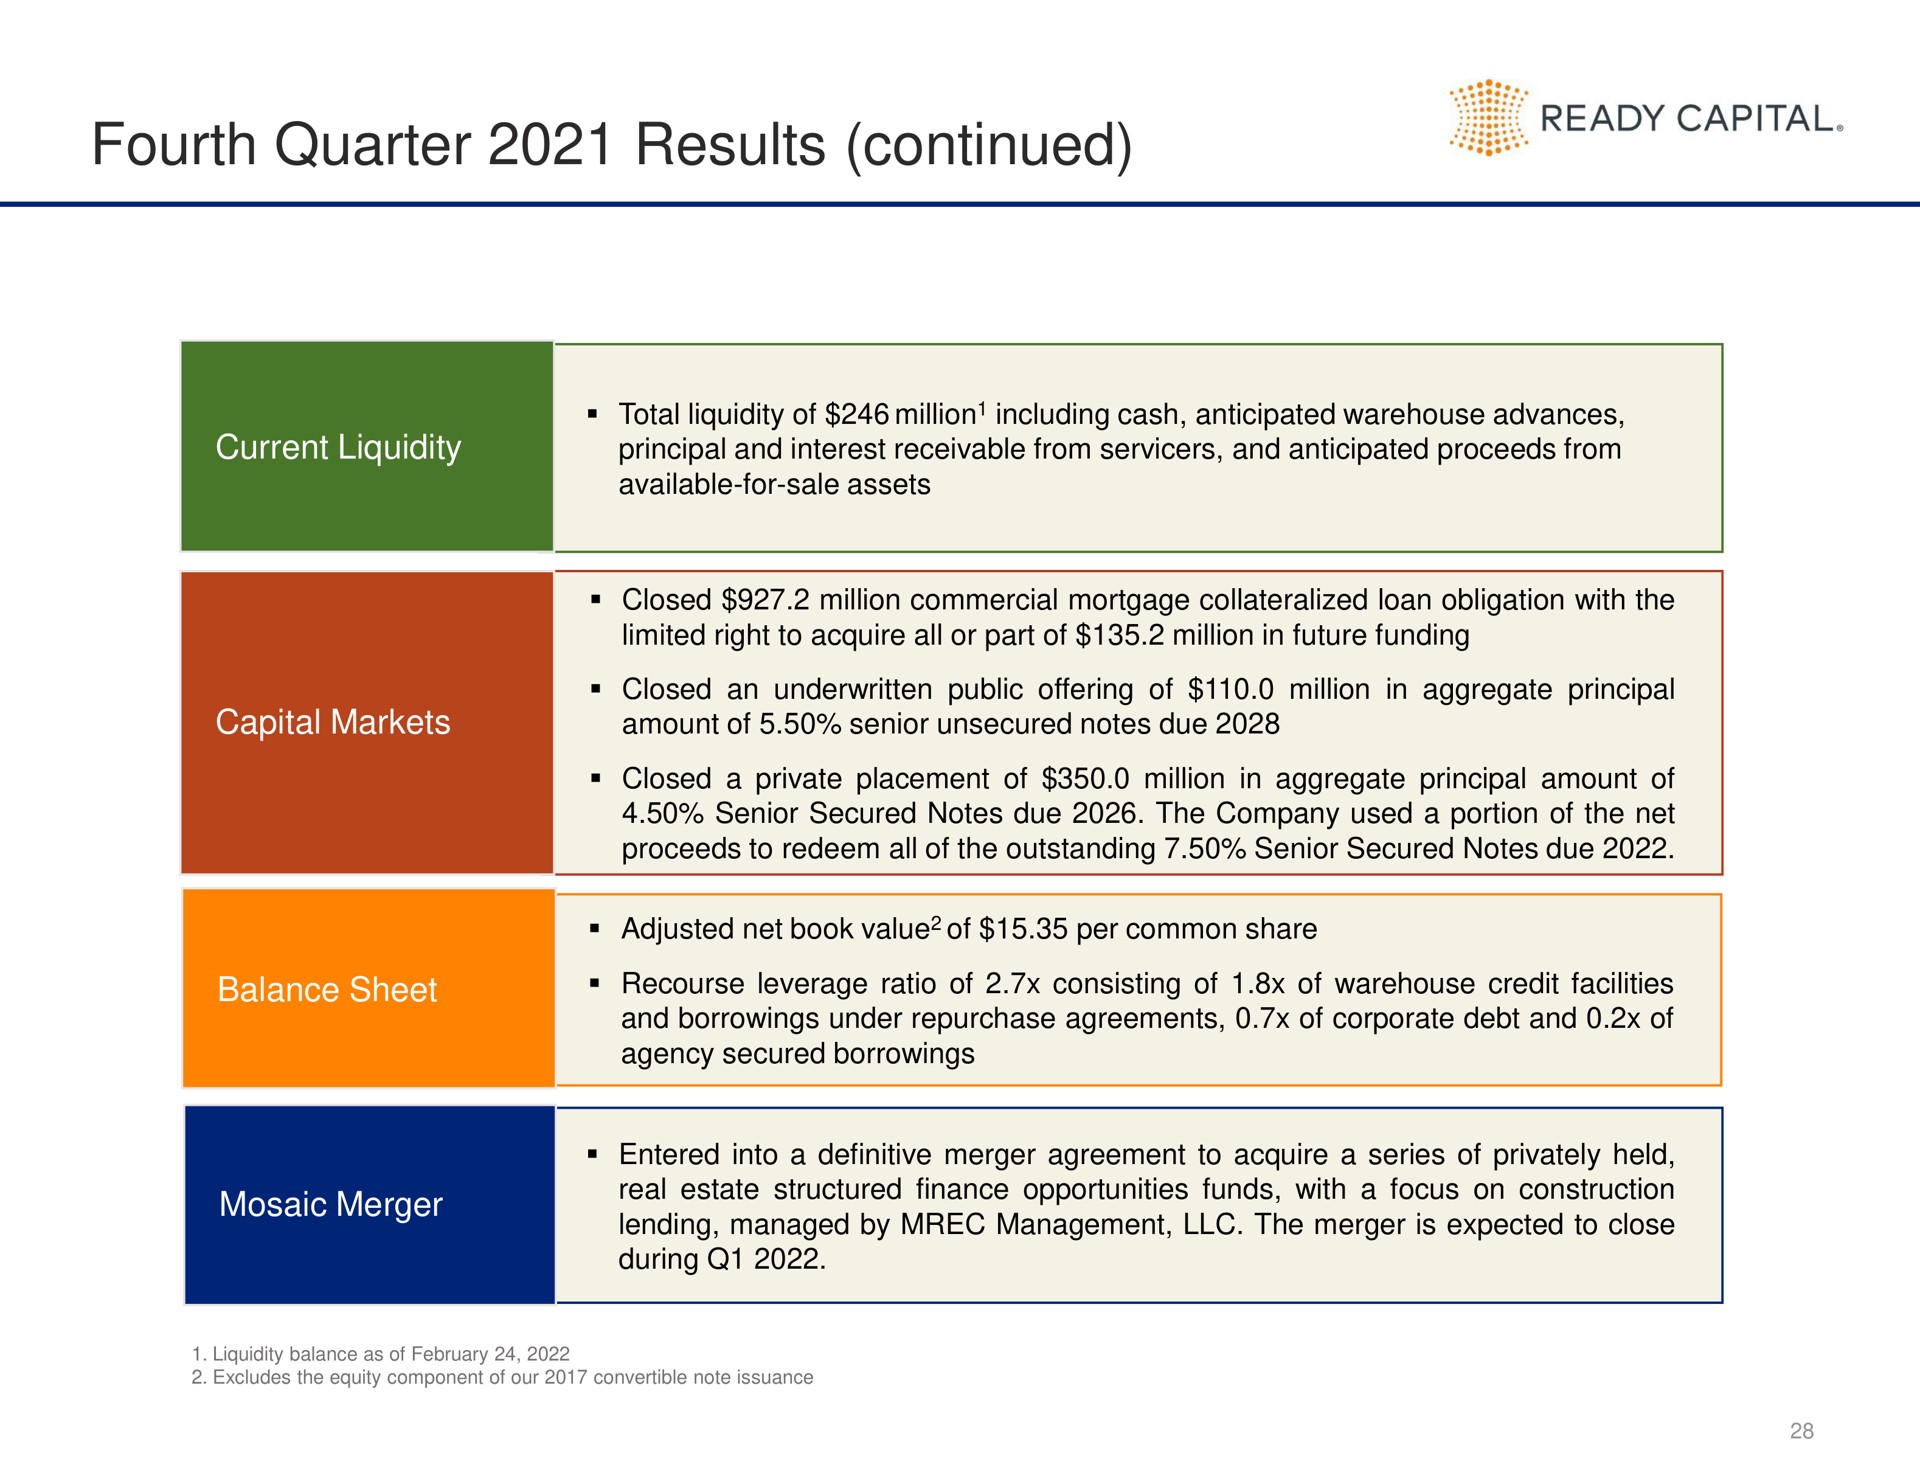 fourth quarter results continued ready capital | Ready Capital